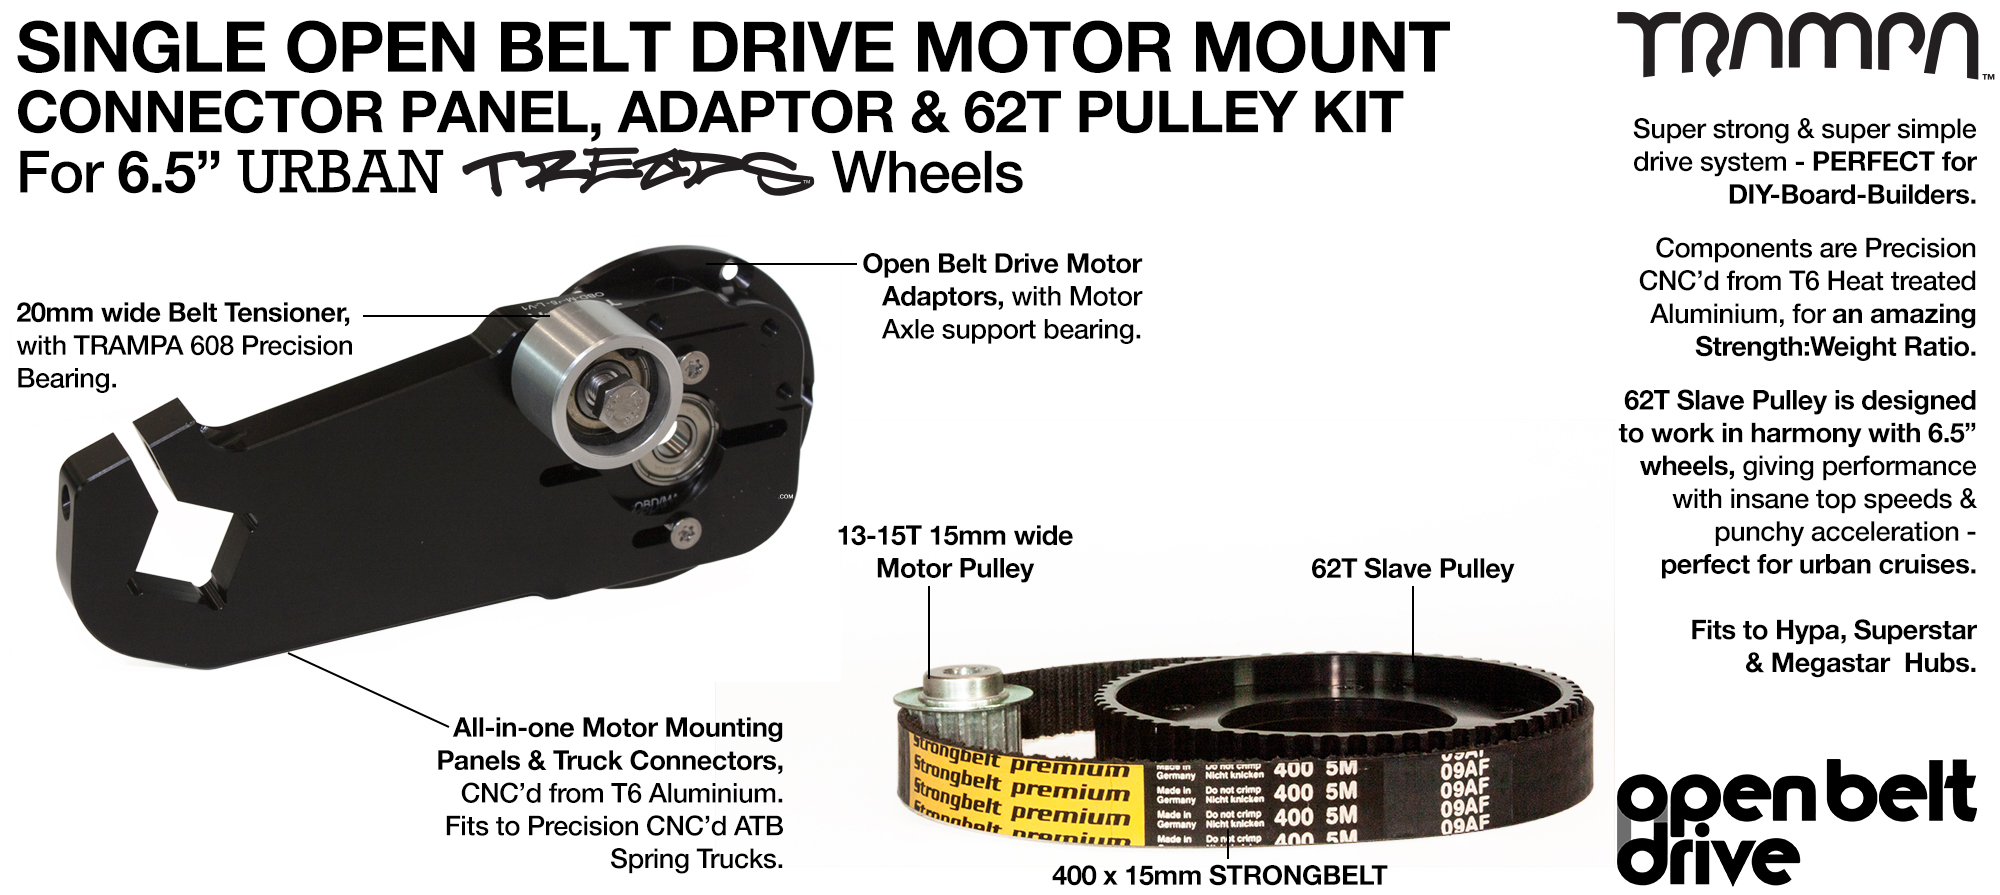 66T OBD Motor Mount & 62 tooth Pulley - SINGLE